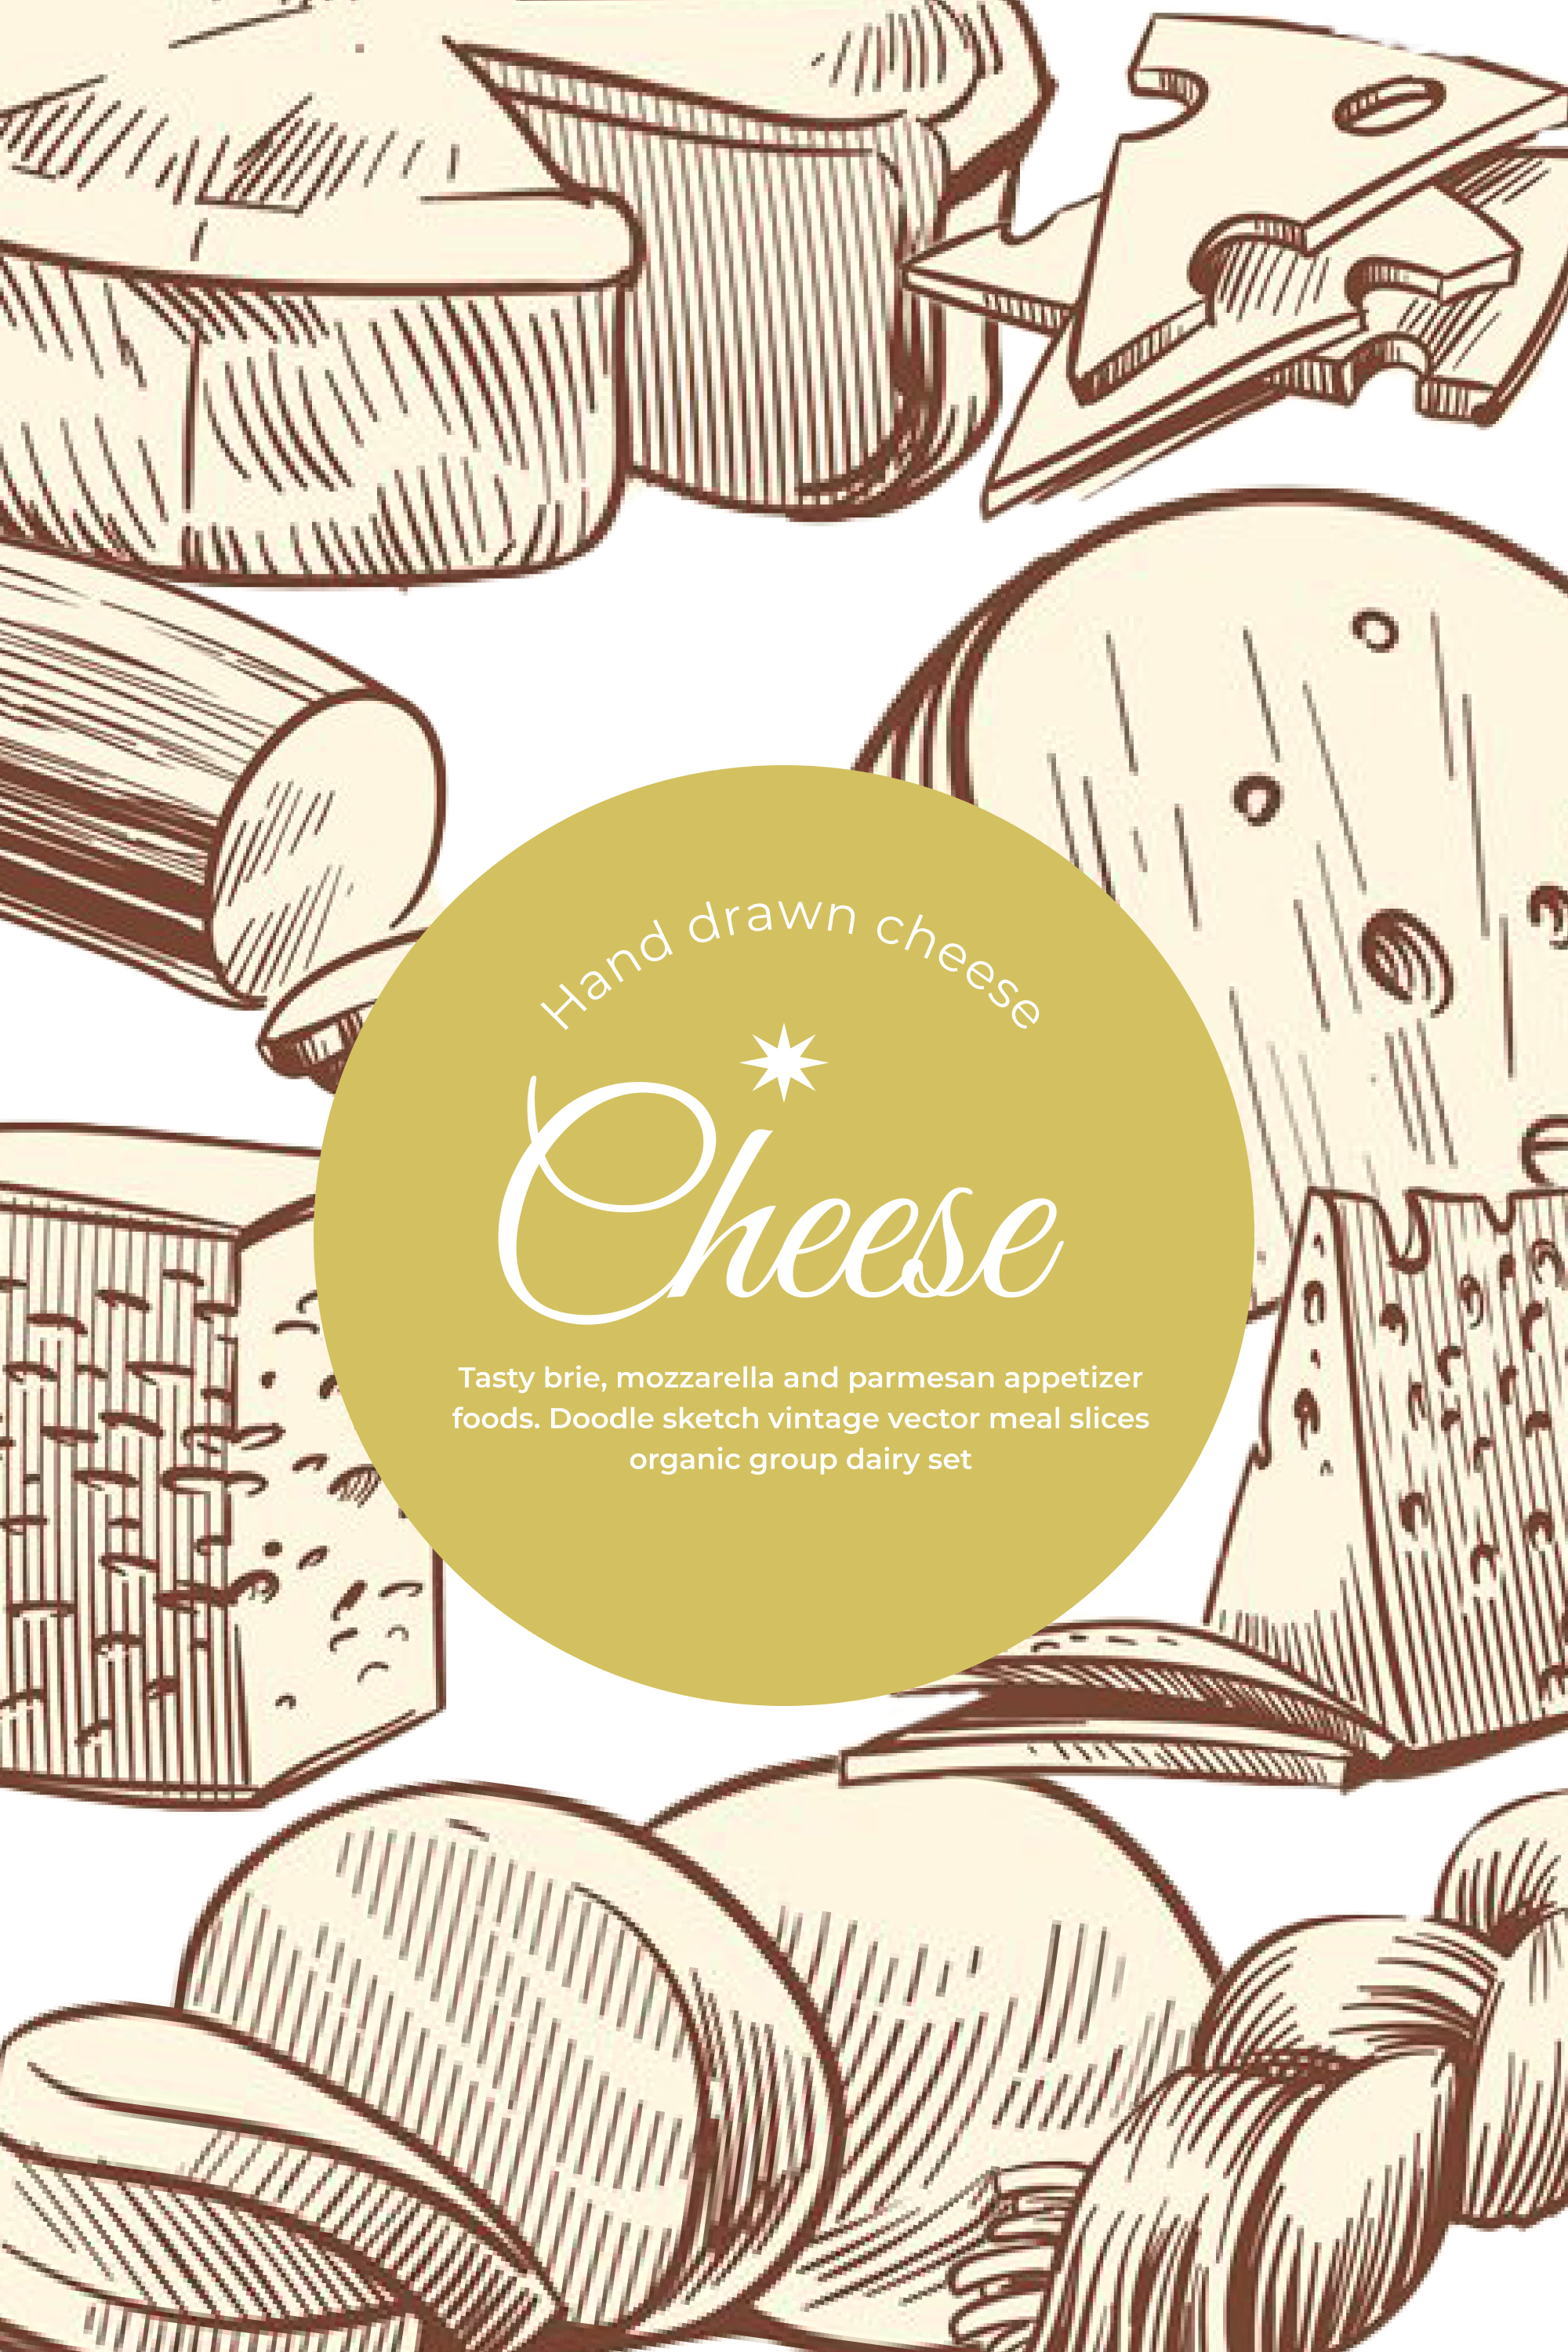 Collection of gorgeous images of various cheeses.